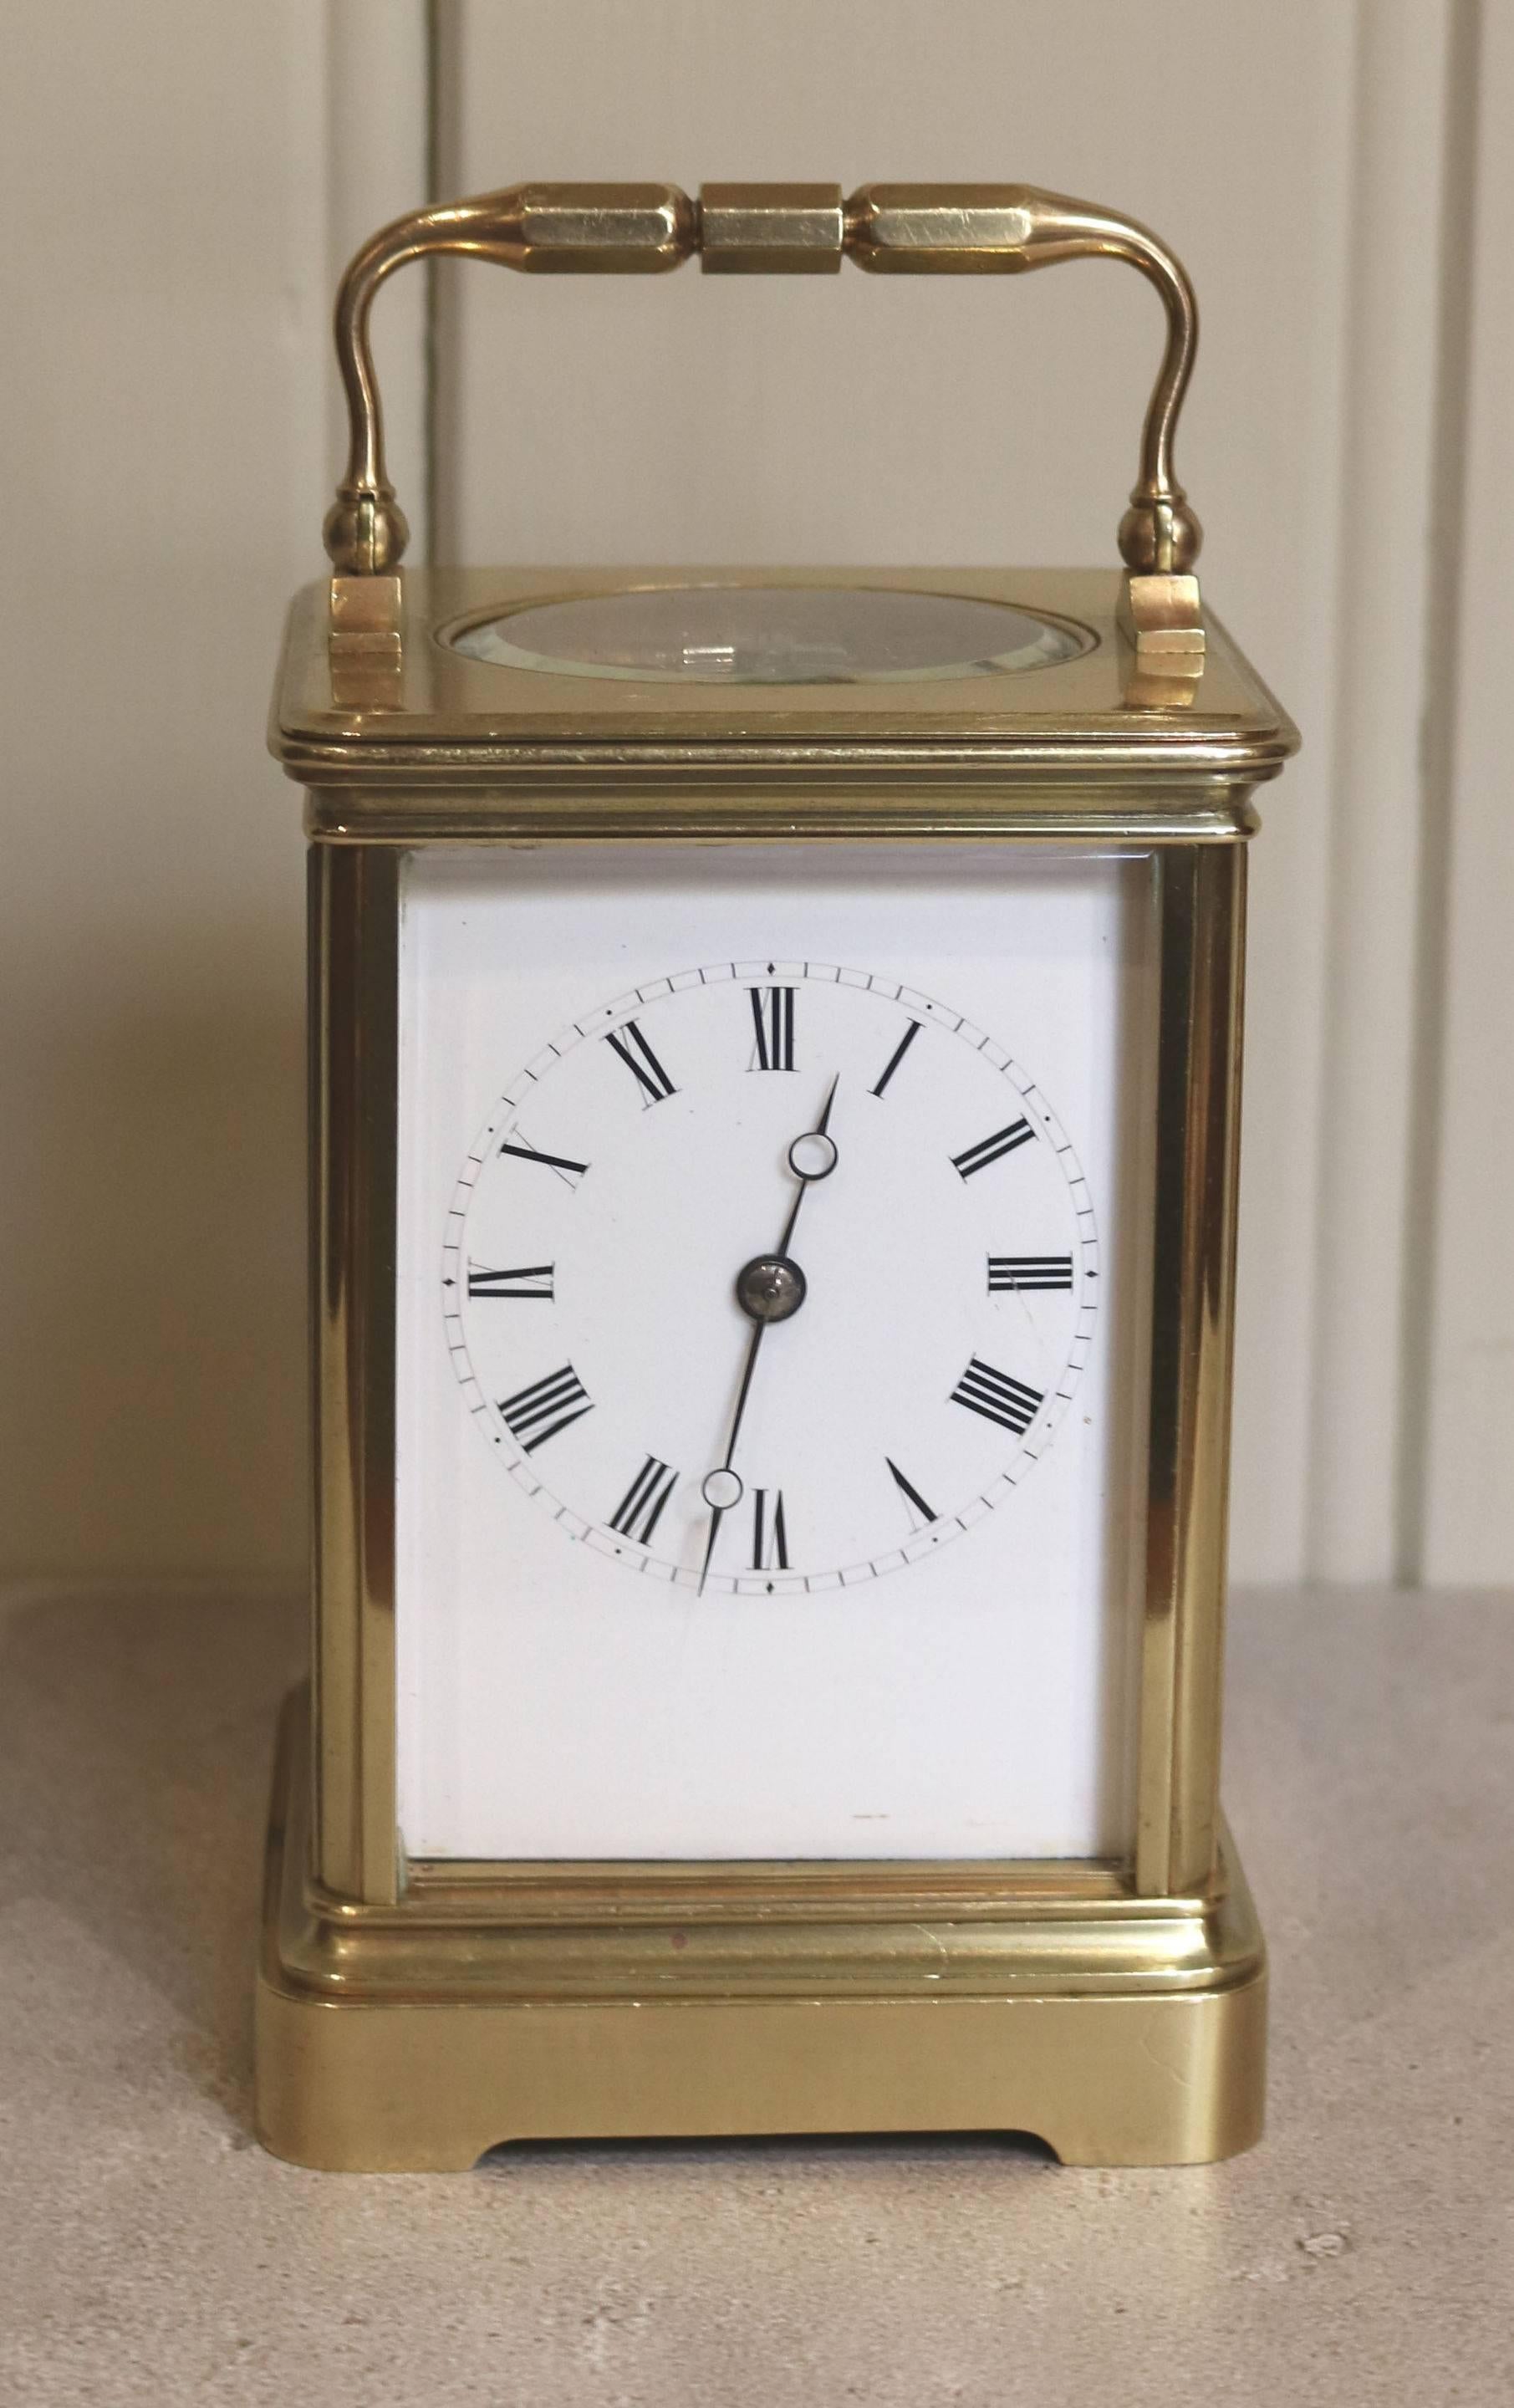 A high quality large timepiece carriage clock made by the renowned maker Drocourt. The corniche case has a large oval top window and bevel glass sides. Its enamel dial has Fine moon hands and the backplate is stamped with the makers logo and is